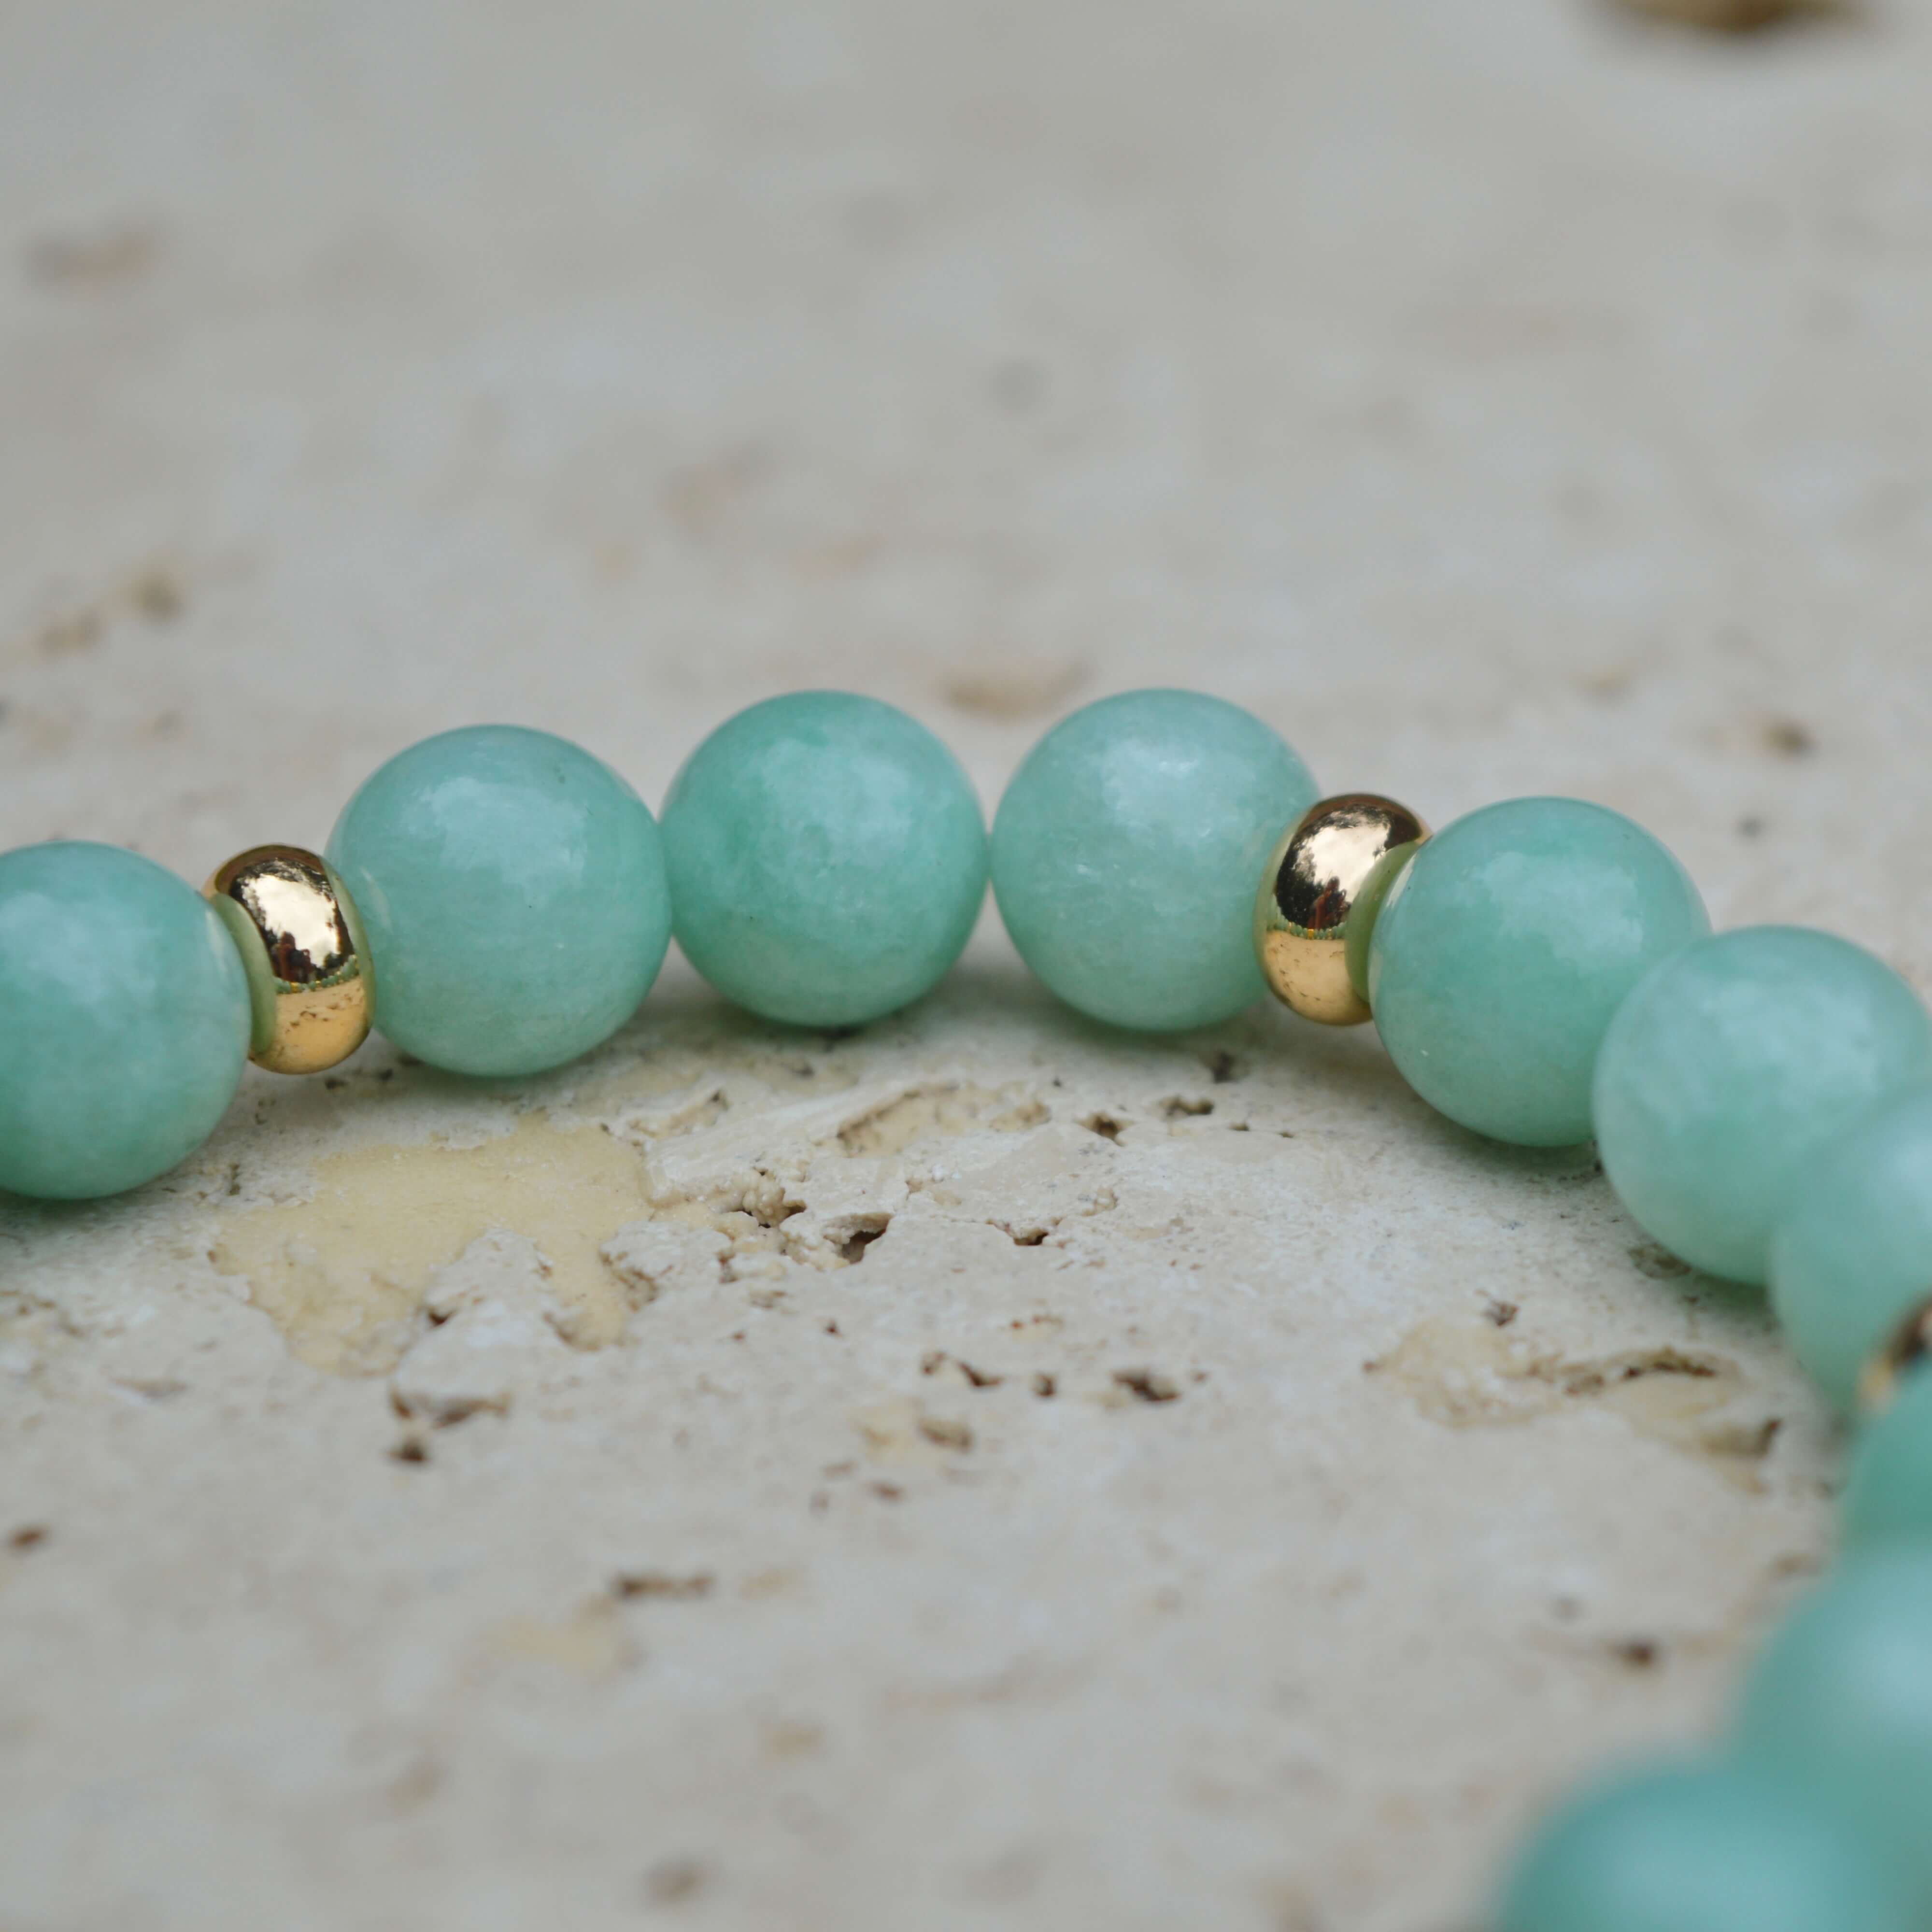 JADE & GOLD BEADED BRACELET - HALCYON COLLECTION - Headless Nation